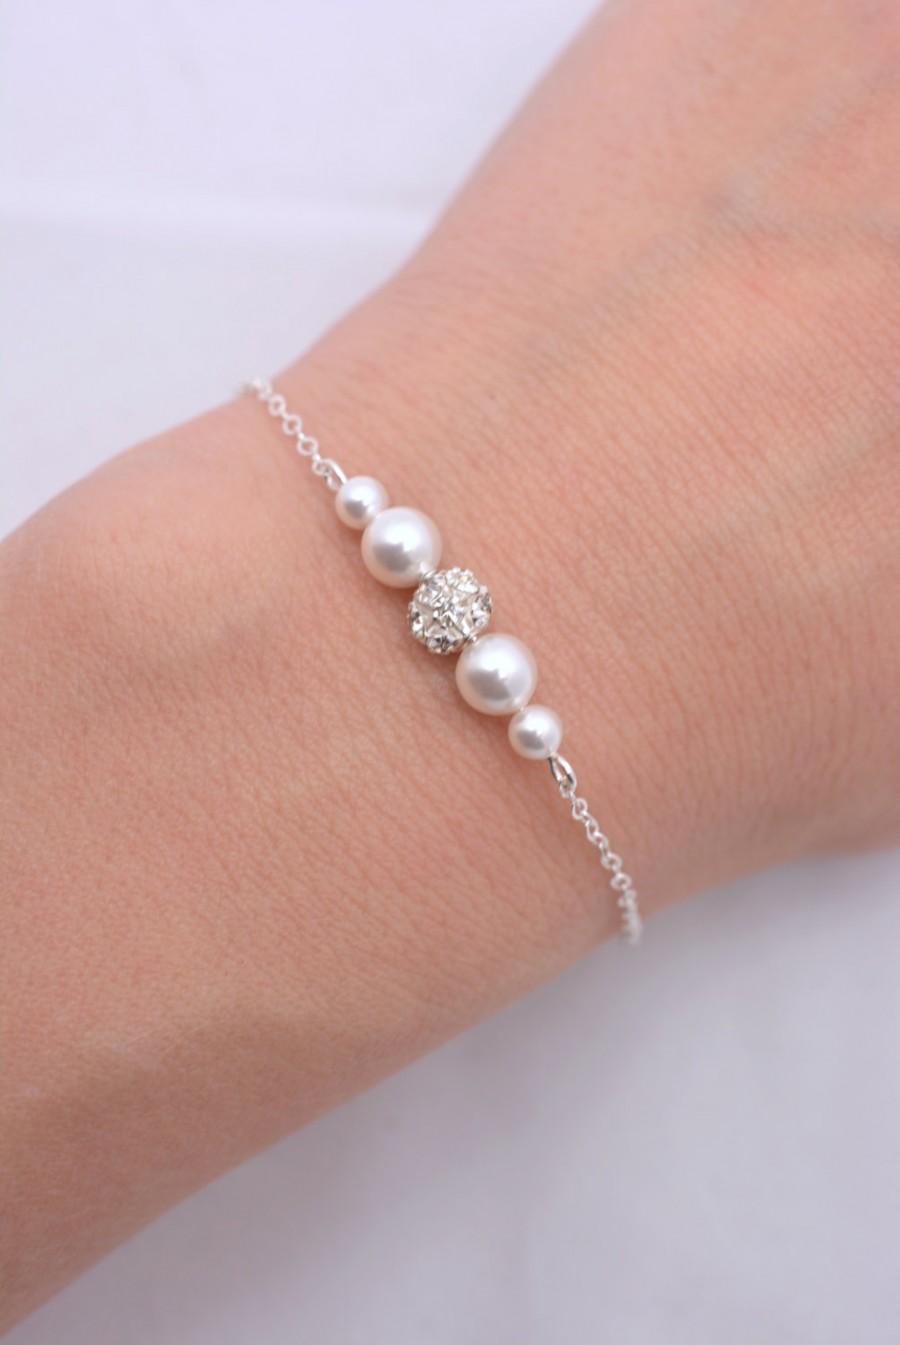 Hochzeit - Set of 7 Pearl and Rhinestone Bracelets, 7 Bridesmaid Bracelets, Pearl and Crystal Bracelets, Floating Pearl, Sterling Silver Chain 0224